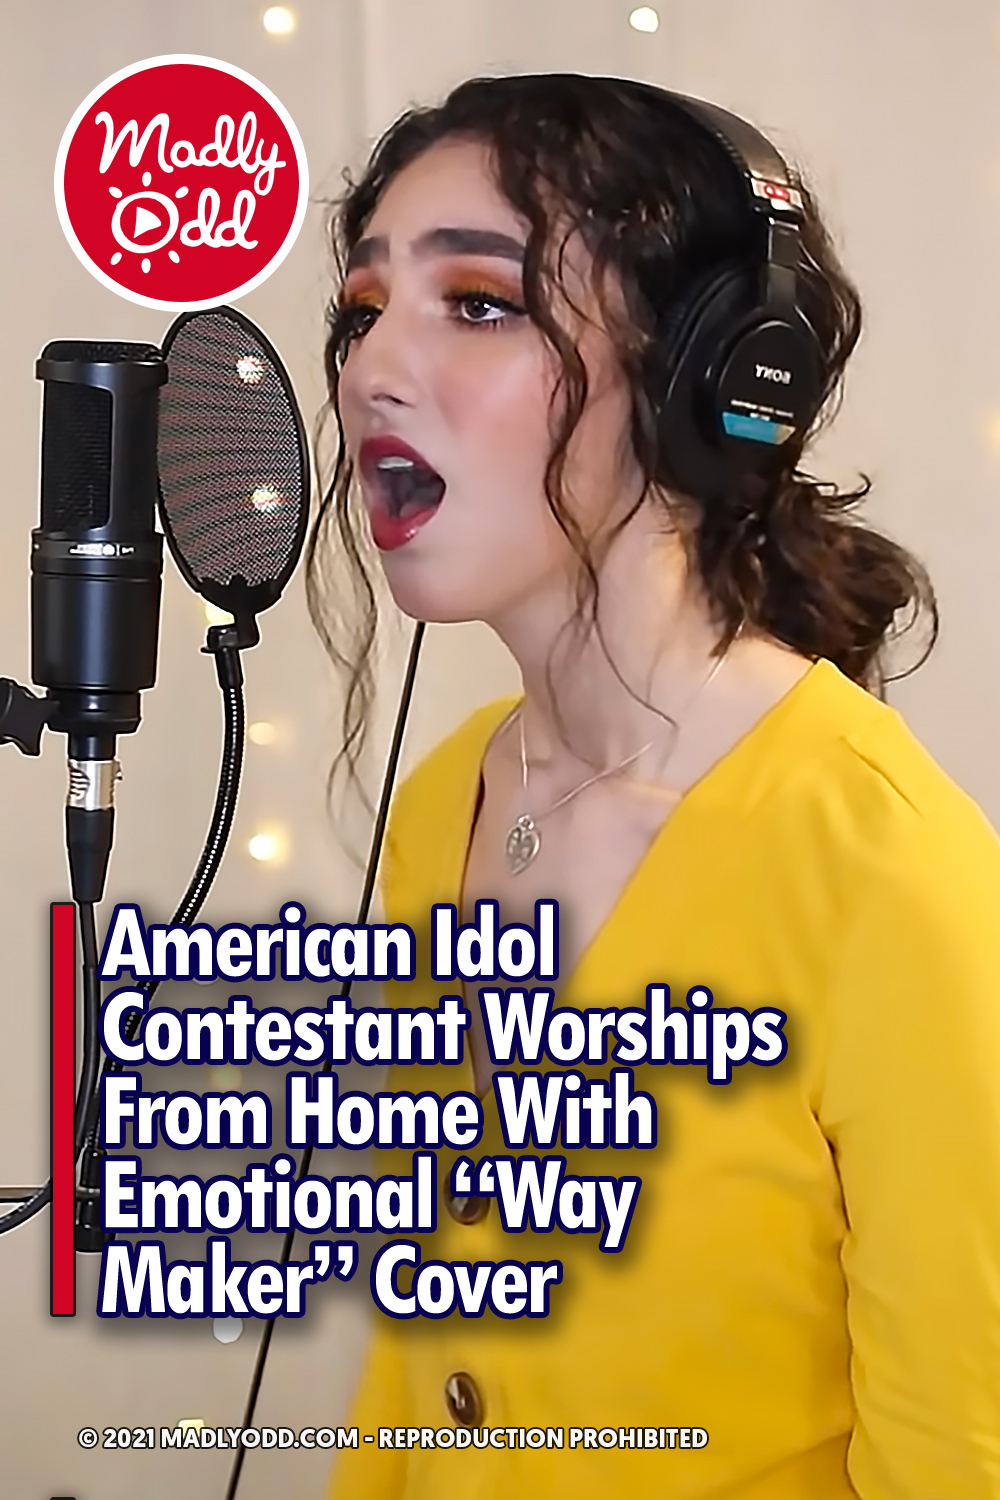 American Idol Contestant Worships From Home With Emotional “Way Maker” Cover